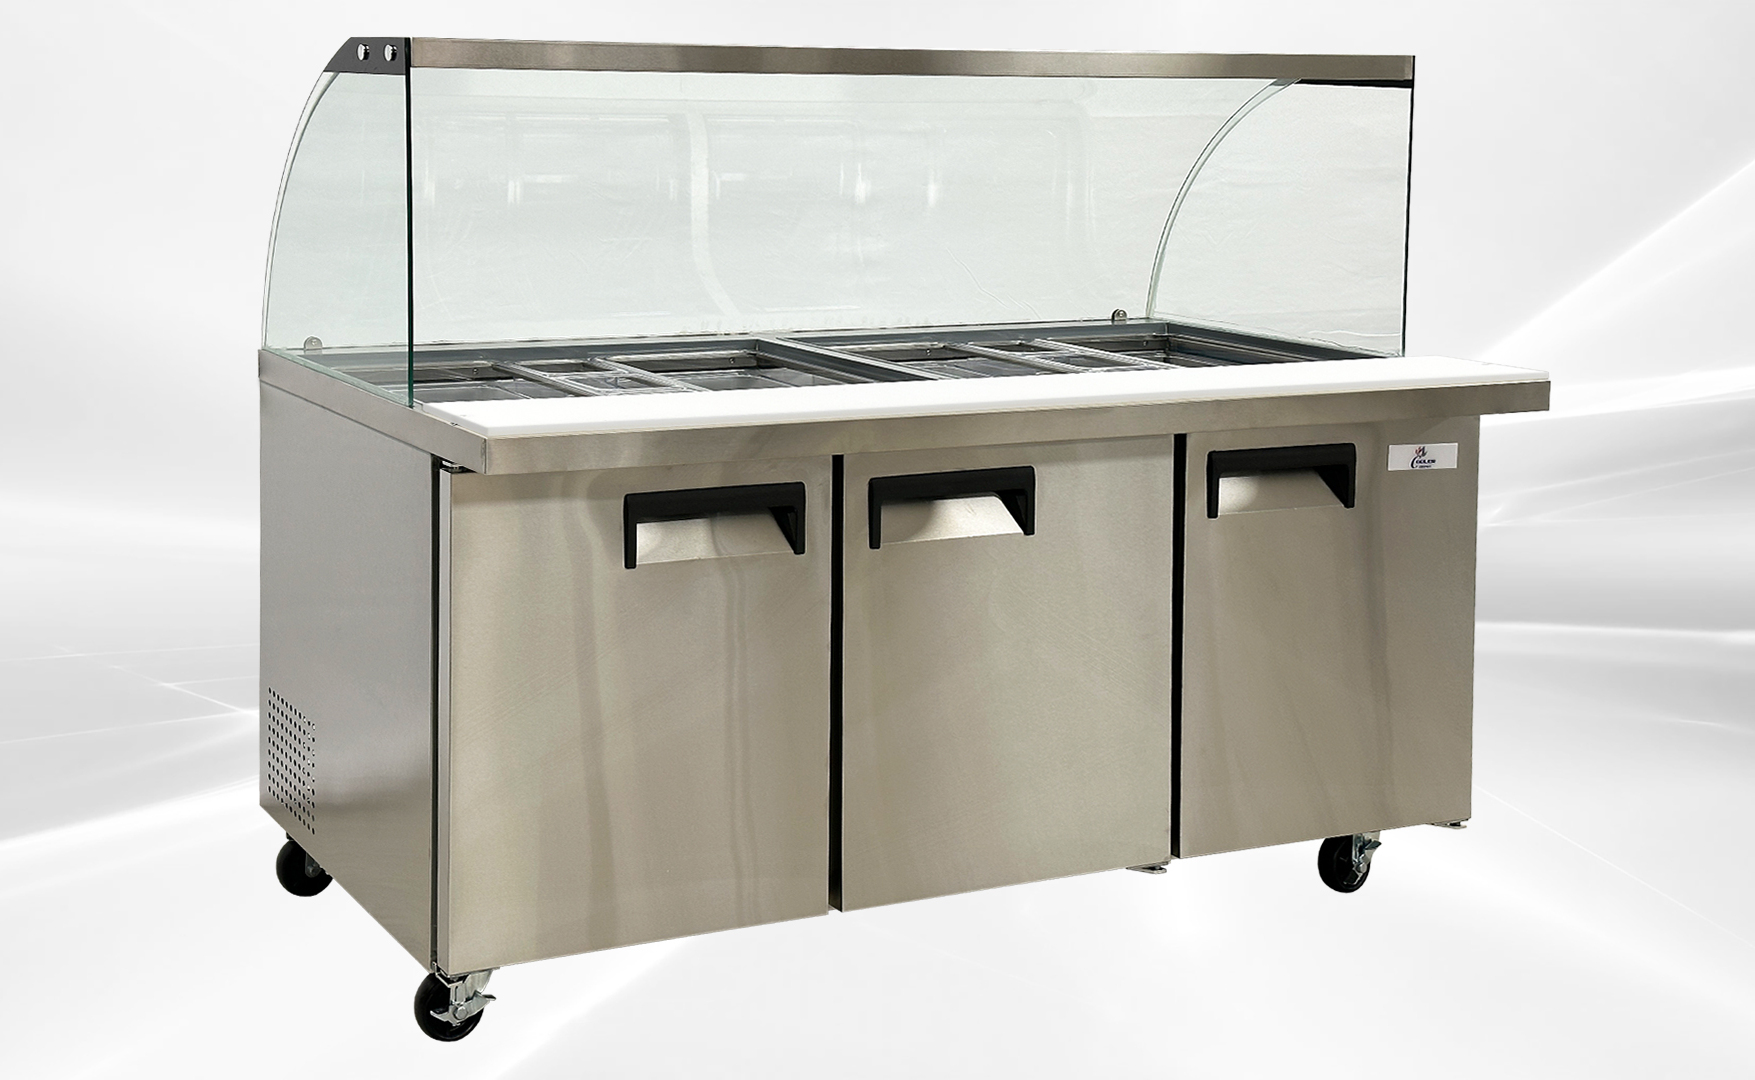 NSF 72 ins Salad Bar Refrigerated Buffet  Cold table SCL72